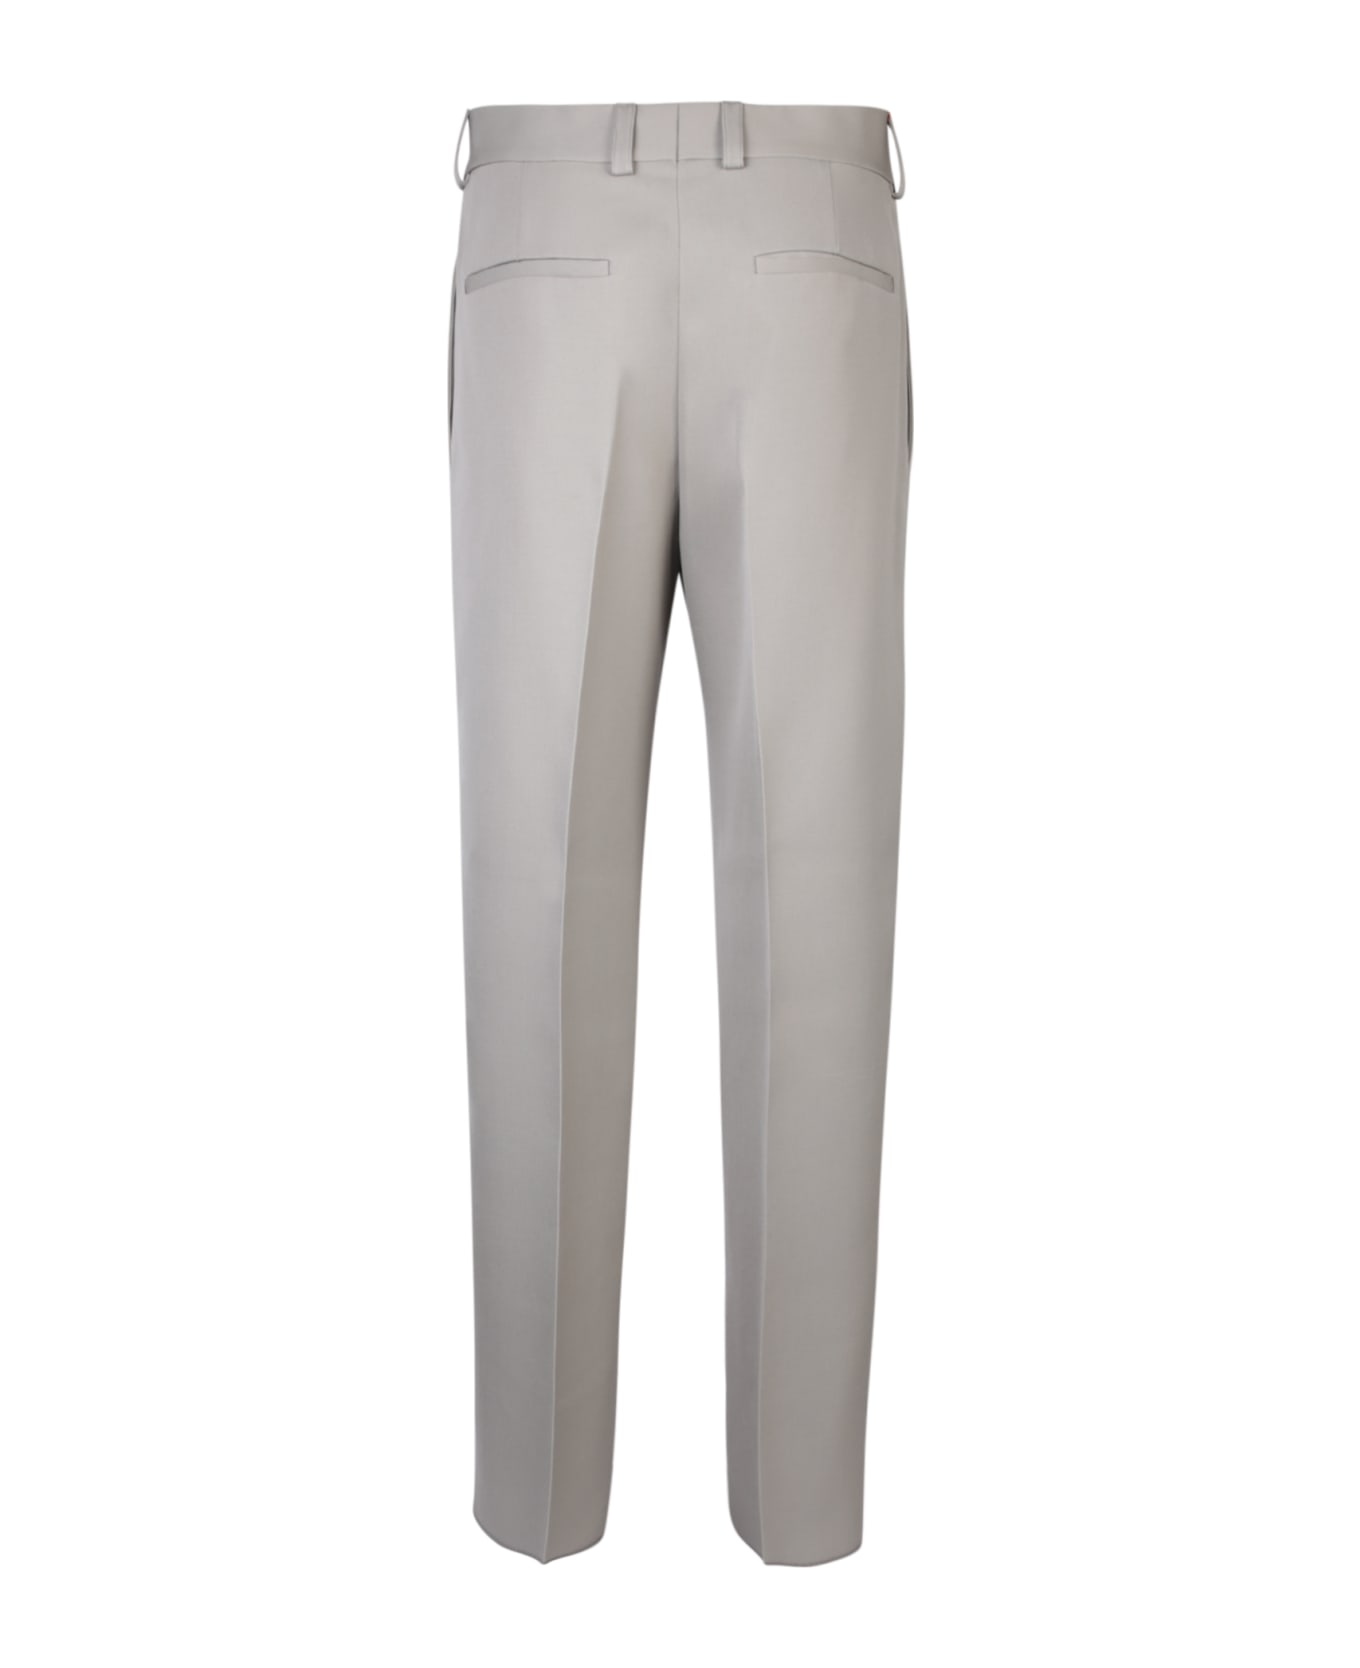 Jil Sander Elegant Trousers With Pences - Pale green ボトムス